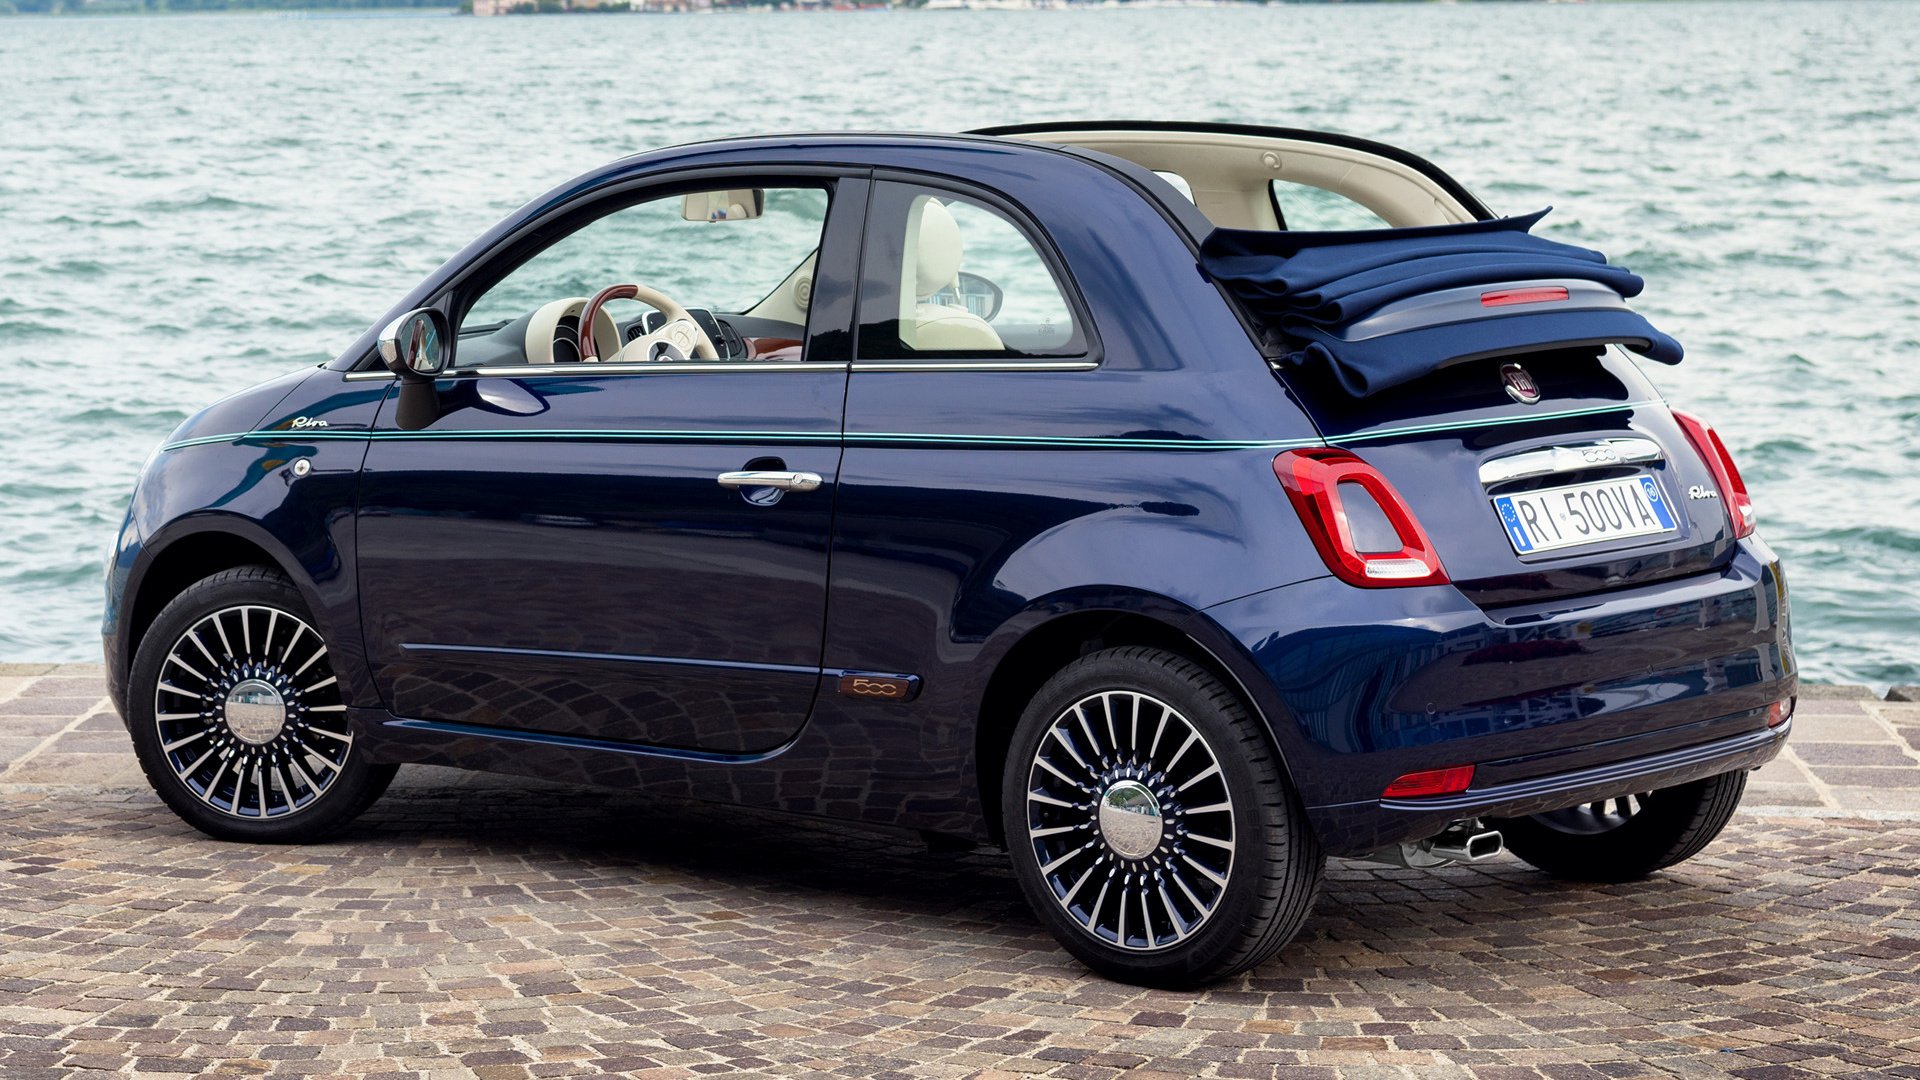 Fiat 500c Riva Hd Wallpapers Background Images